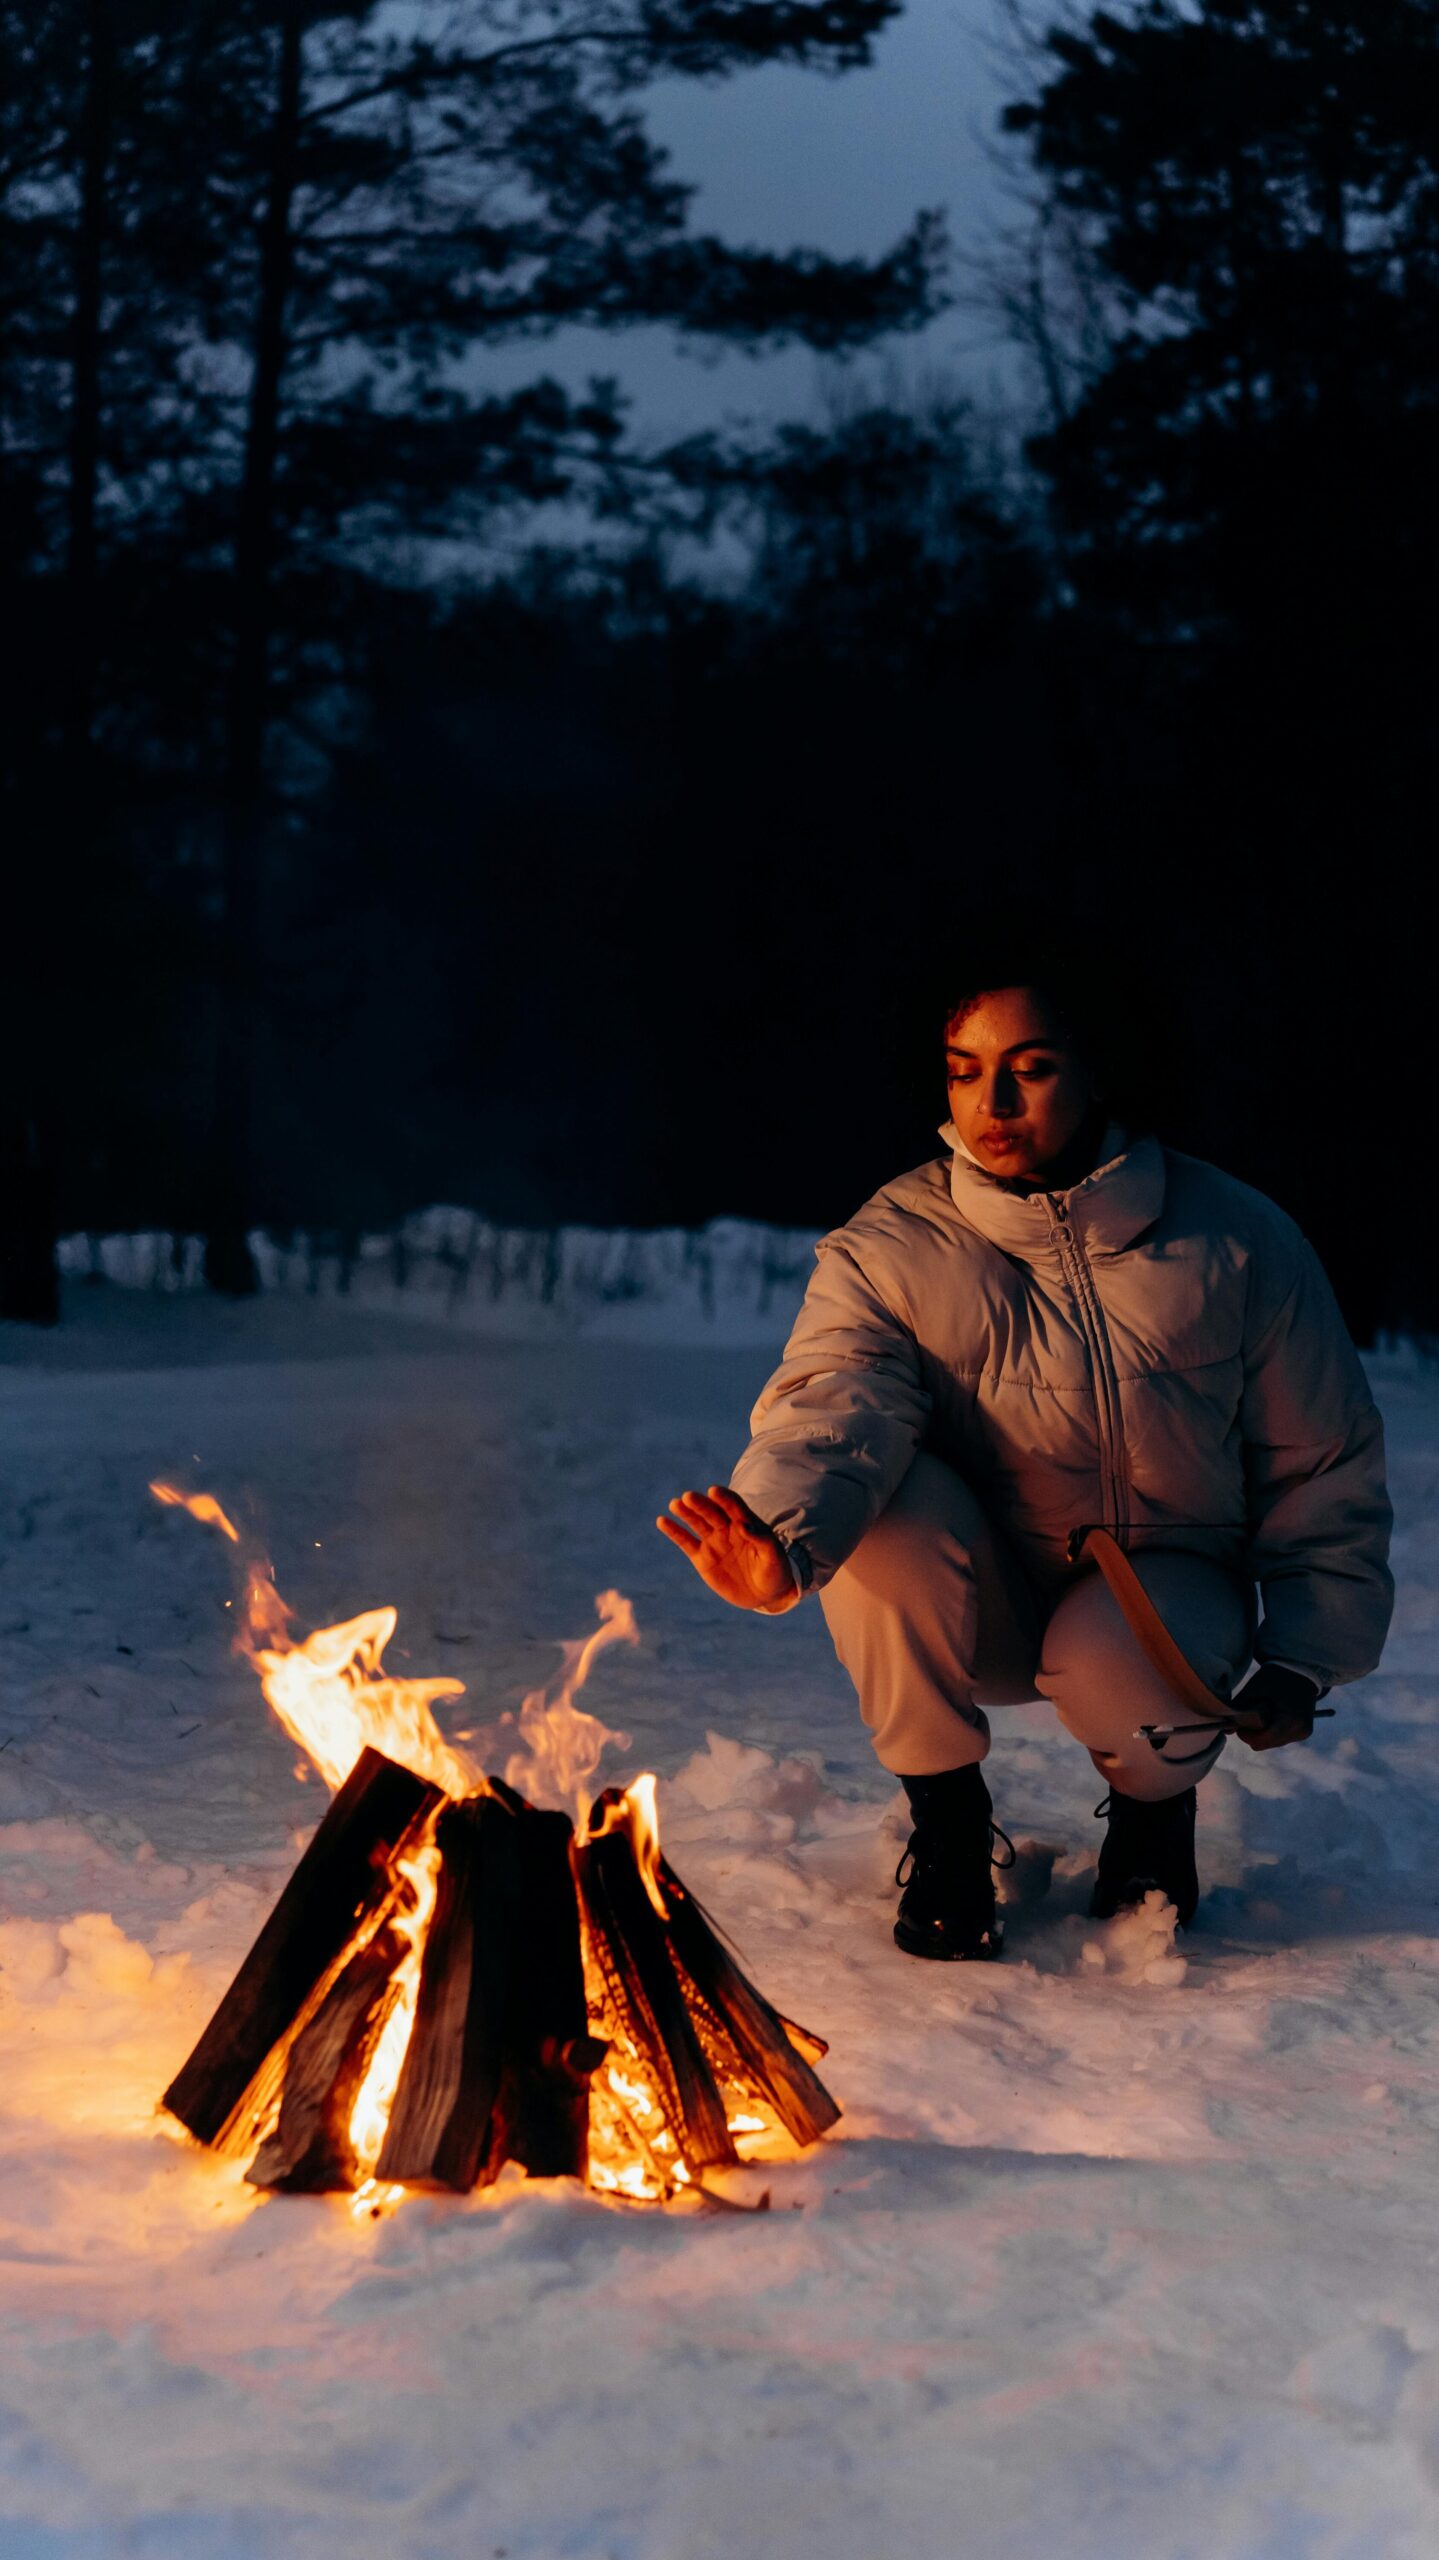 Woman warms up by a fire in the snow